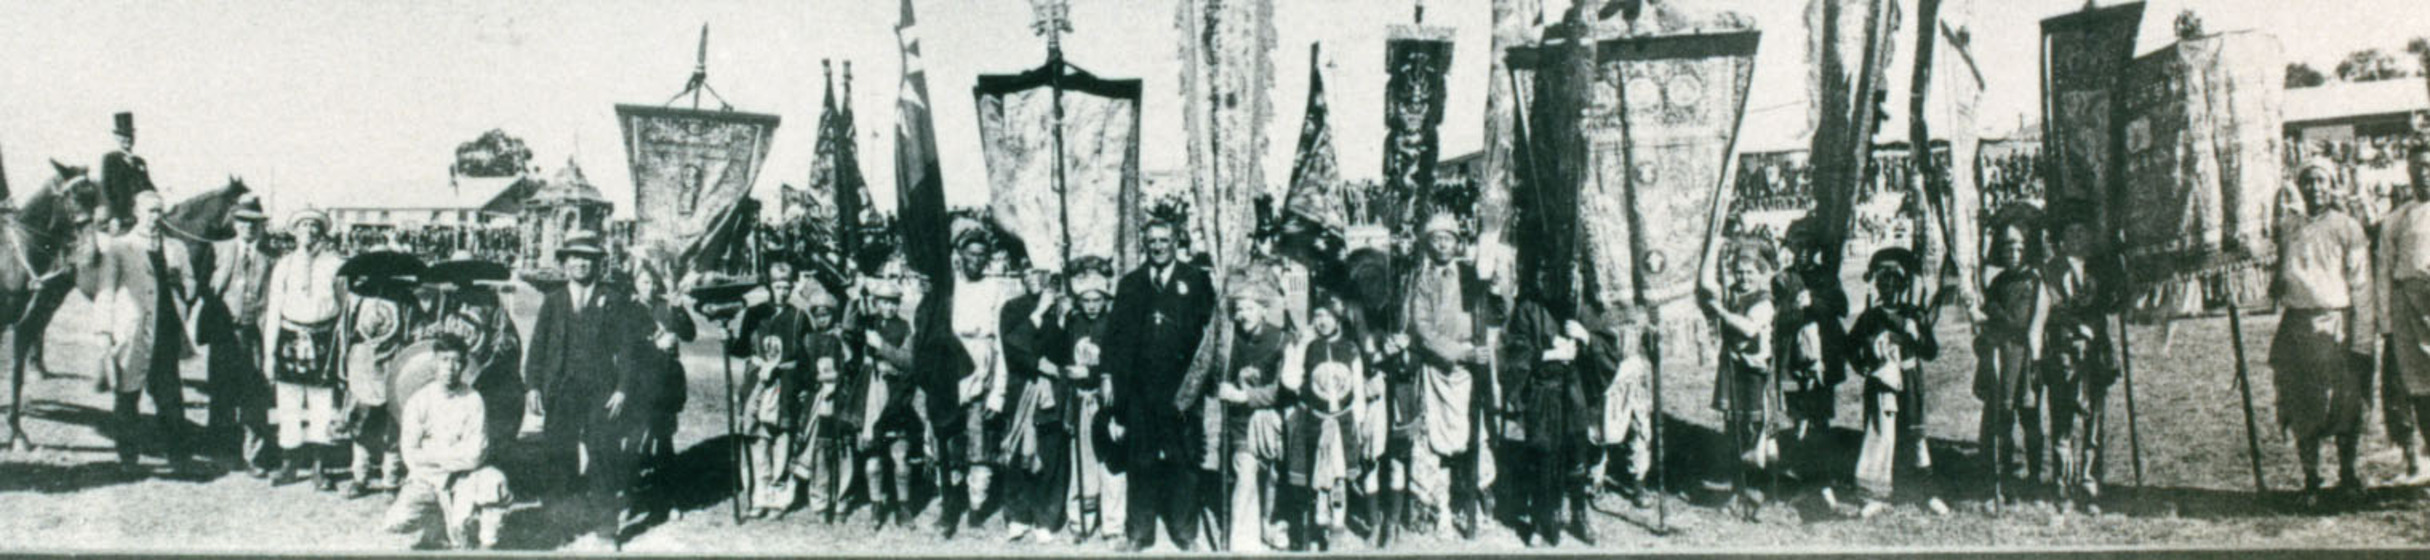 Wide black and white photograph of a row of costumed people some with banners.